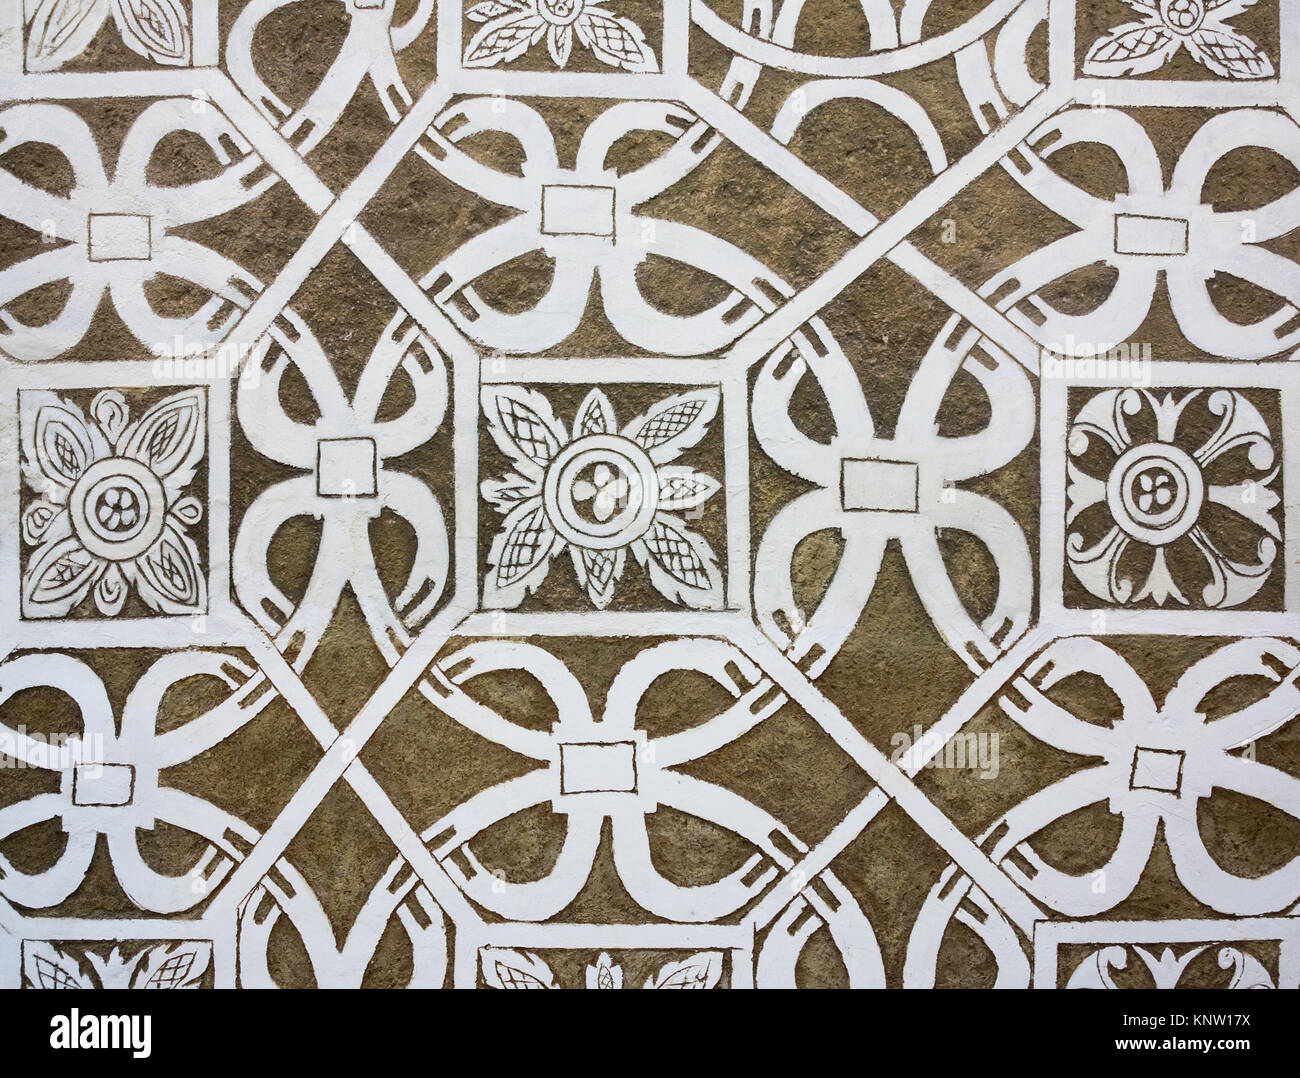 Sgraffito - Renaissance decoration of stucco of walls by scraping Stock Photo